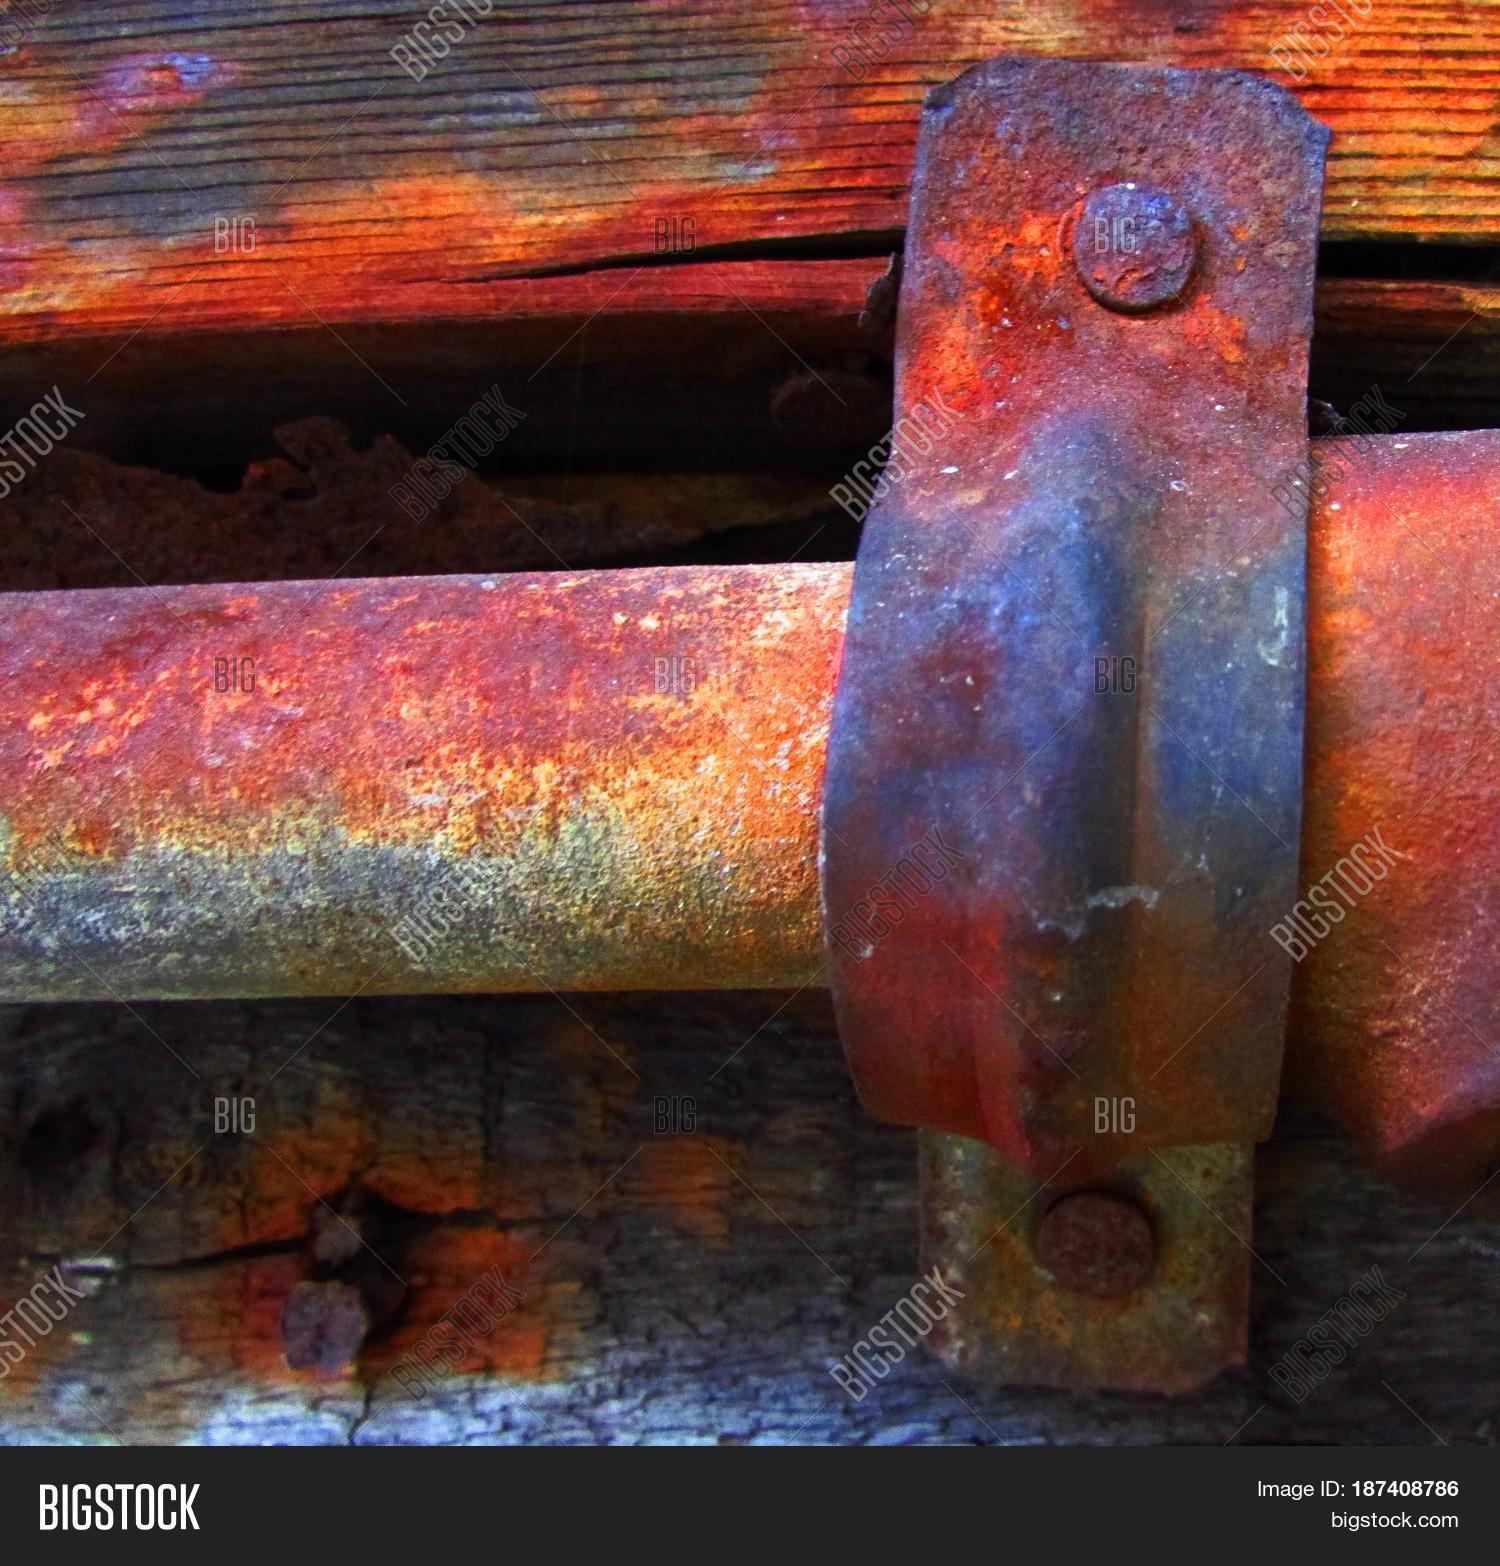 Rusted Metal Pipe Held Place By Image & Photo | Bigstock